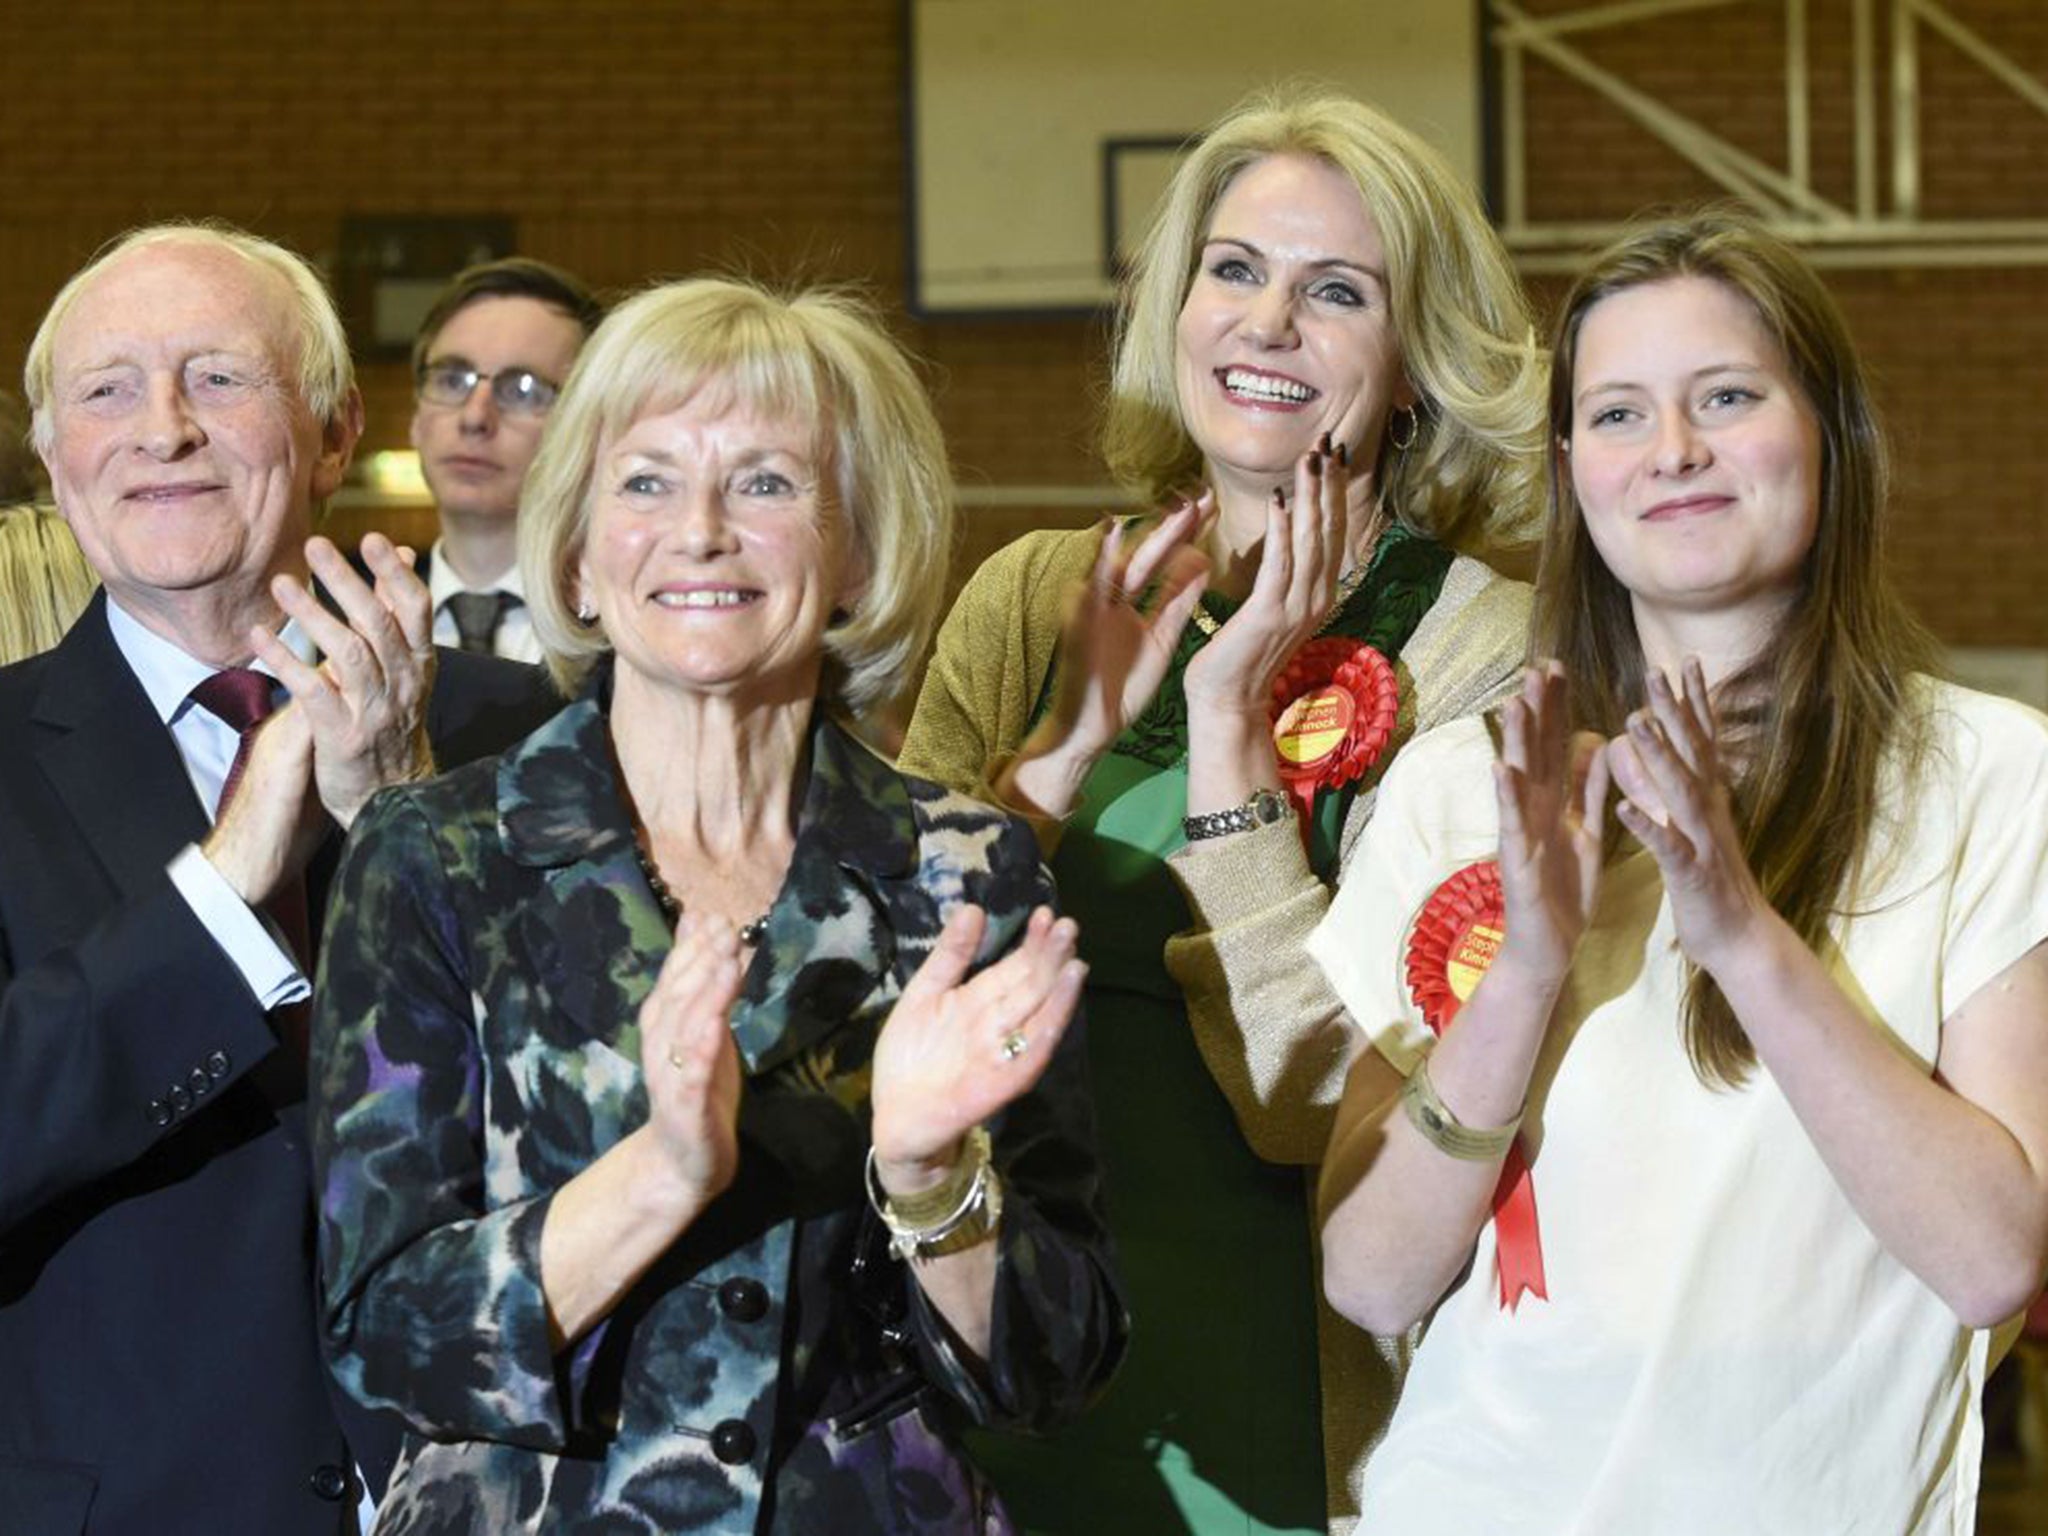 Helle Thorning-Schmidt celebrates with her daughter Johanna and mother and father-in-law Glenys and Neil Kinnock